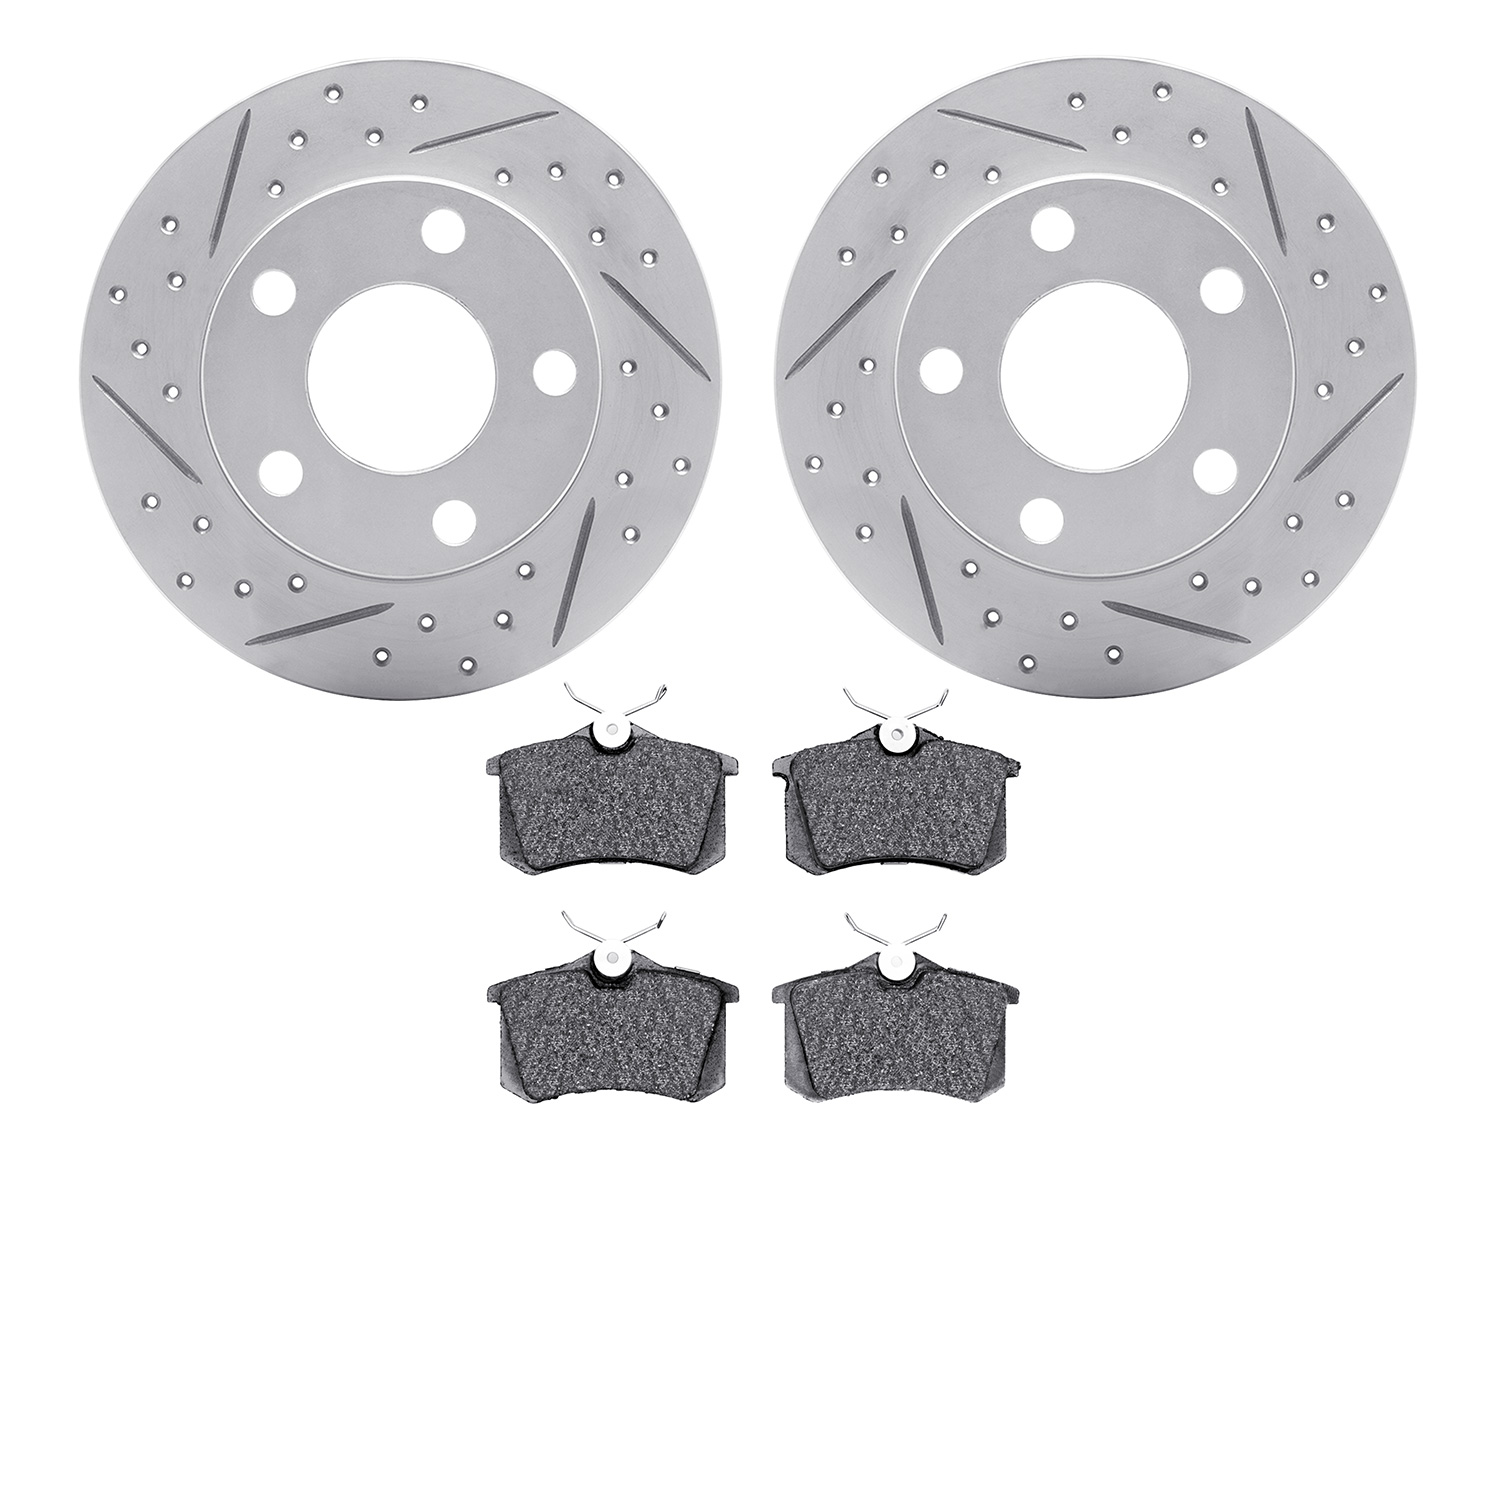 2502-74011 Geoperformance Drilled/Slotted Rotors w/5000 Advanced Brake Pads Kit, 1998-2005 Audi/Volkswagen, Position: Rear